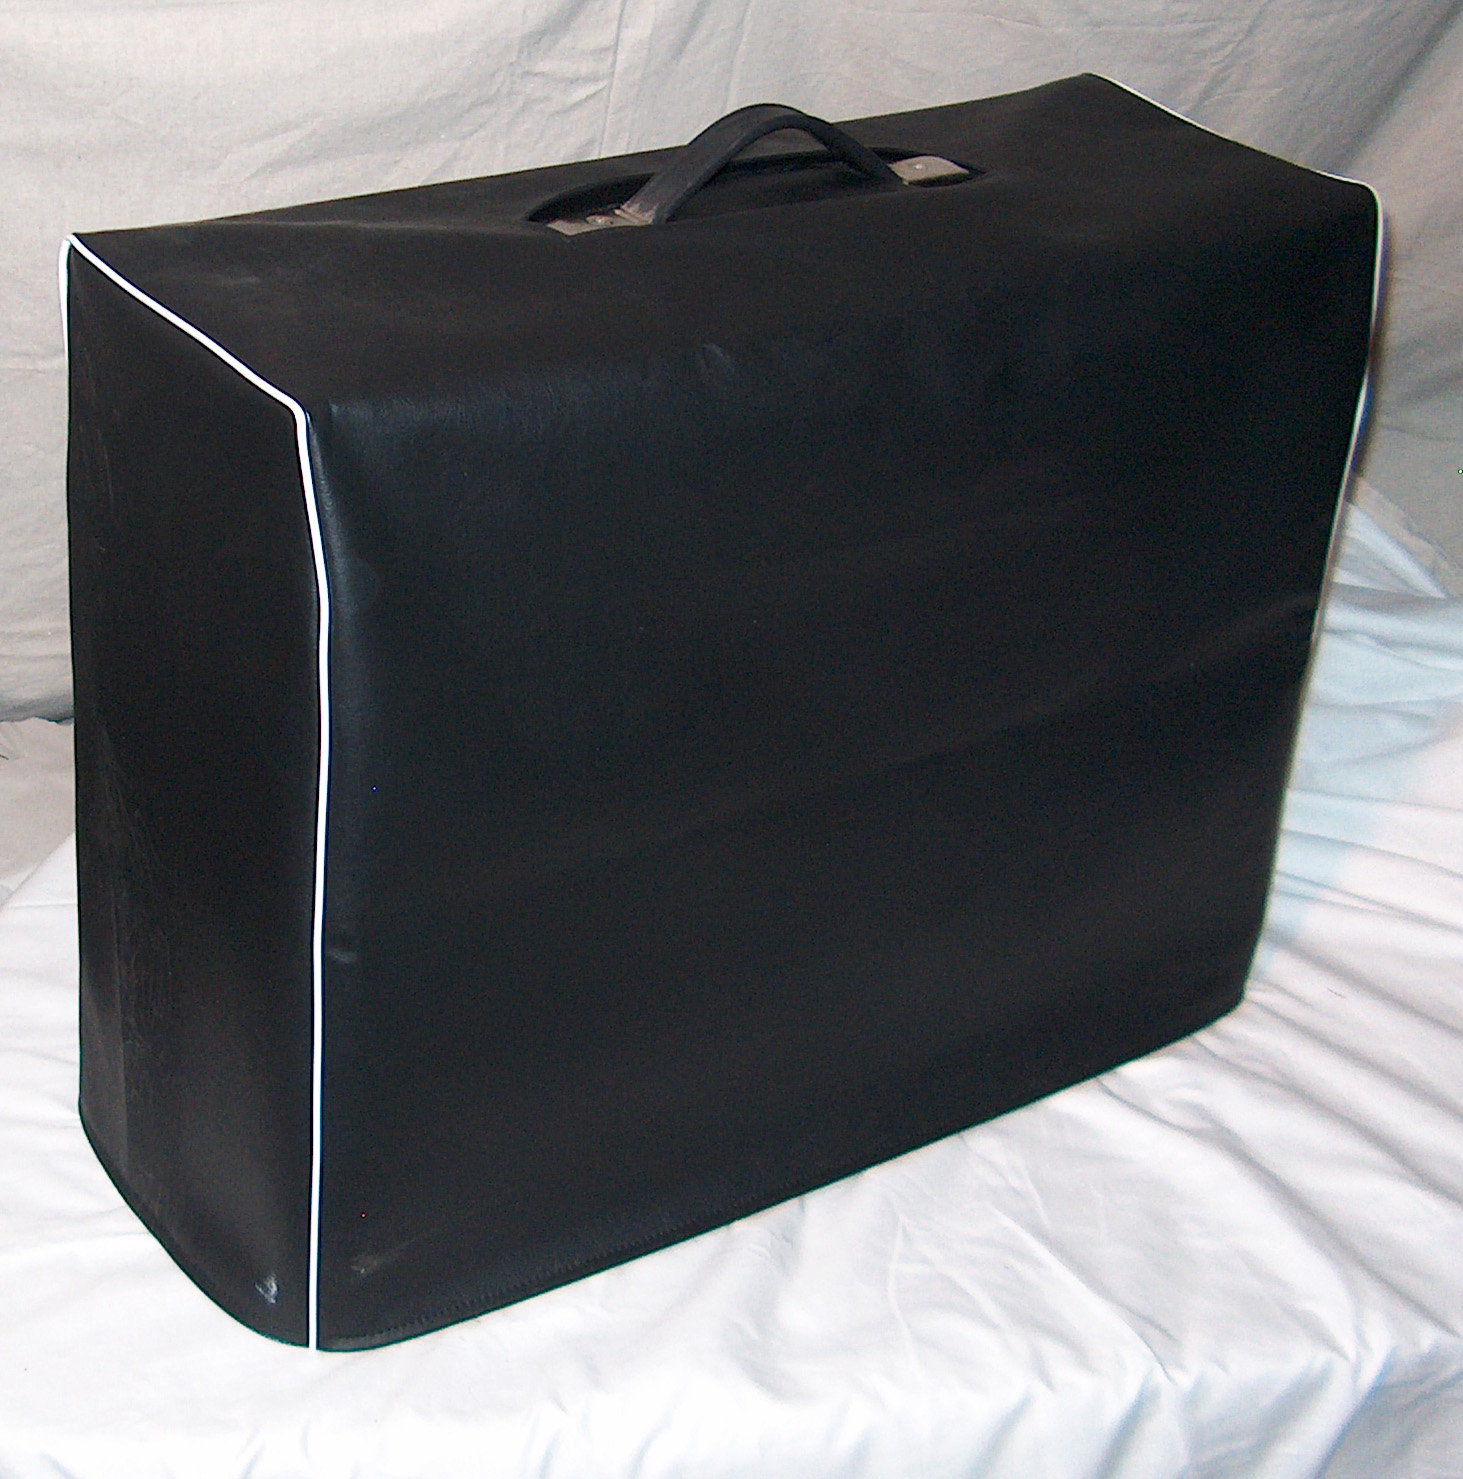 Example of black vinyl amp cover with white piping